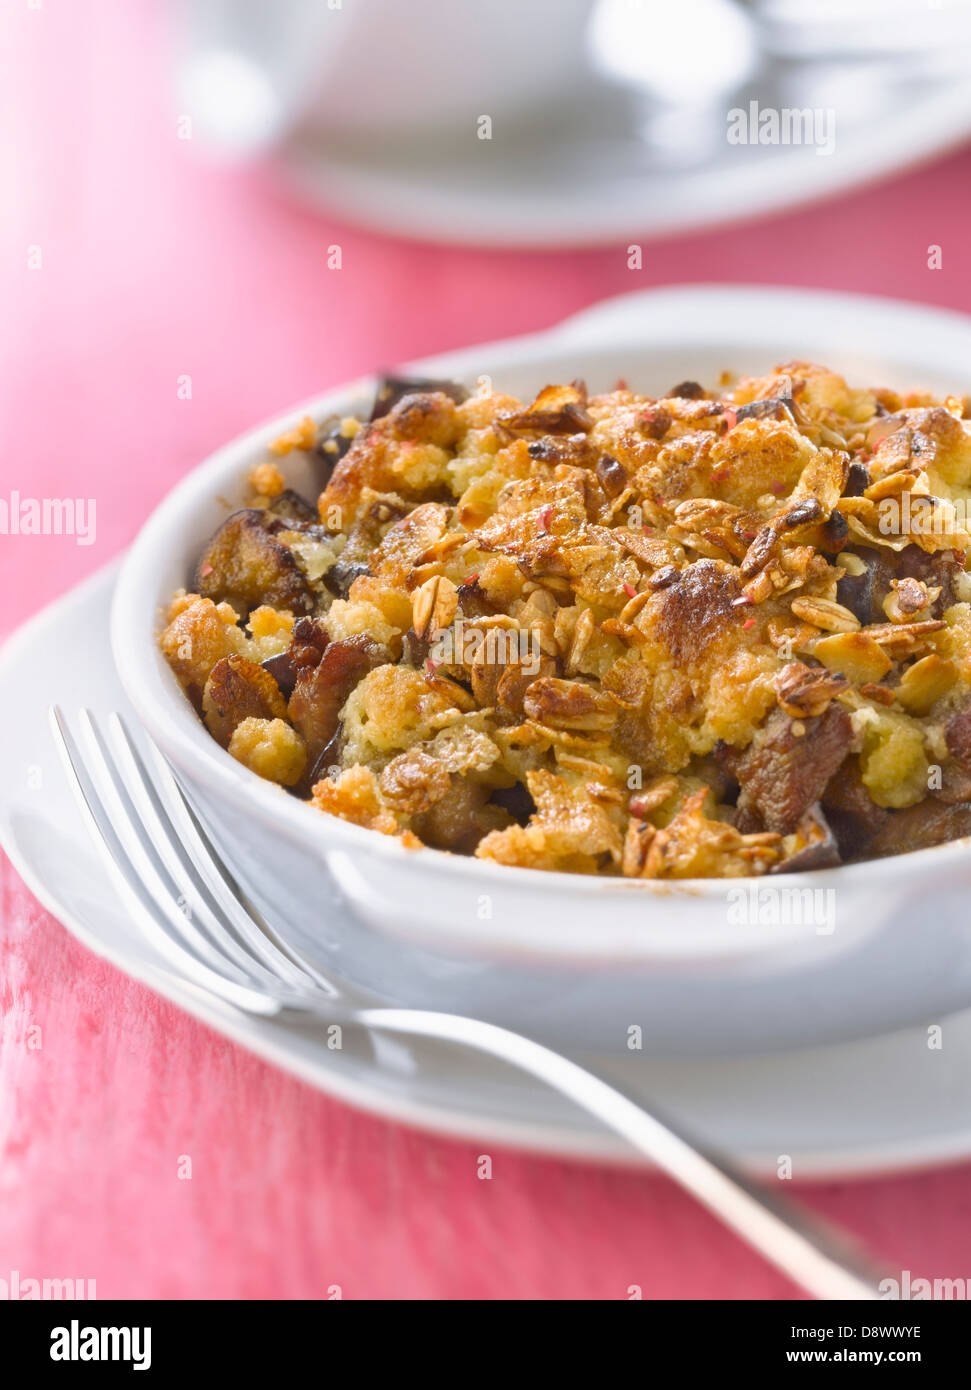 Lamb and eggplant cereal crumble Stock Photo